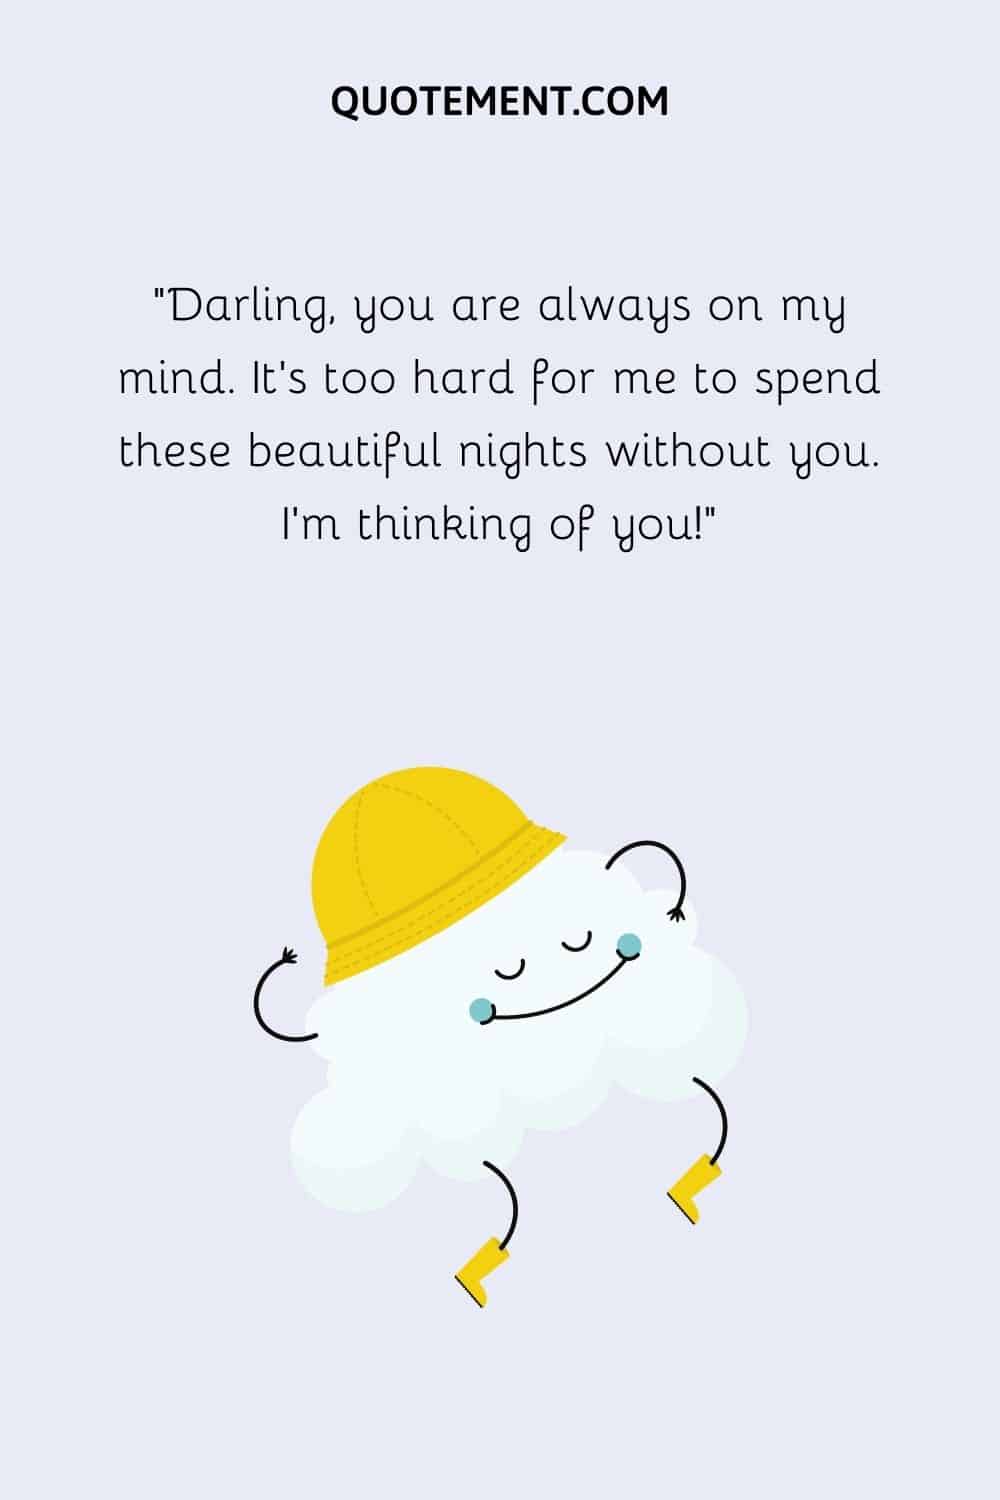 Darling, you are always on my mind